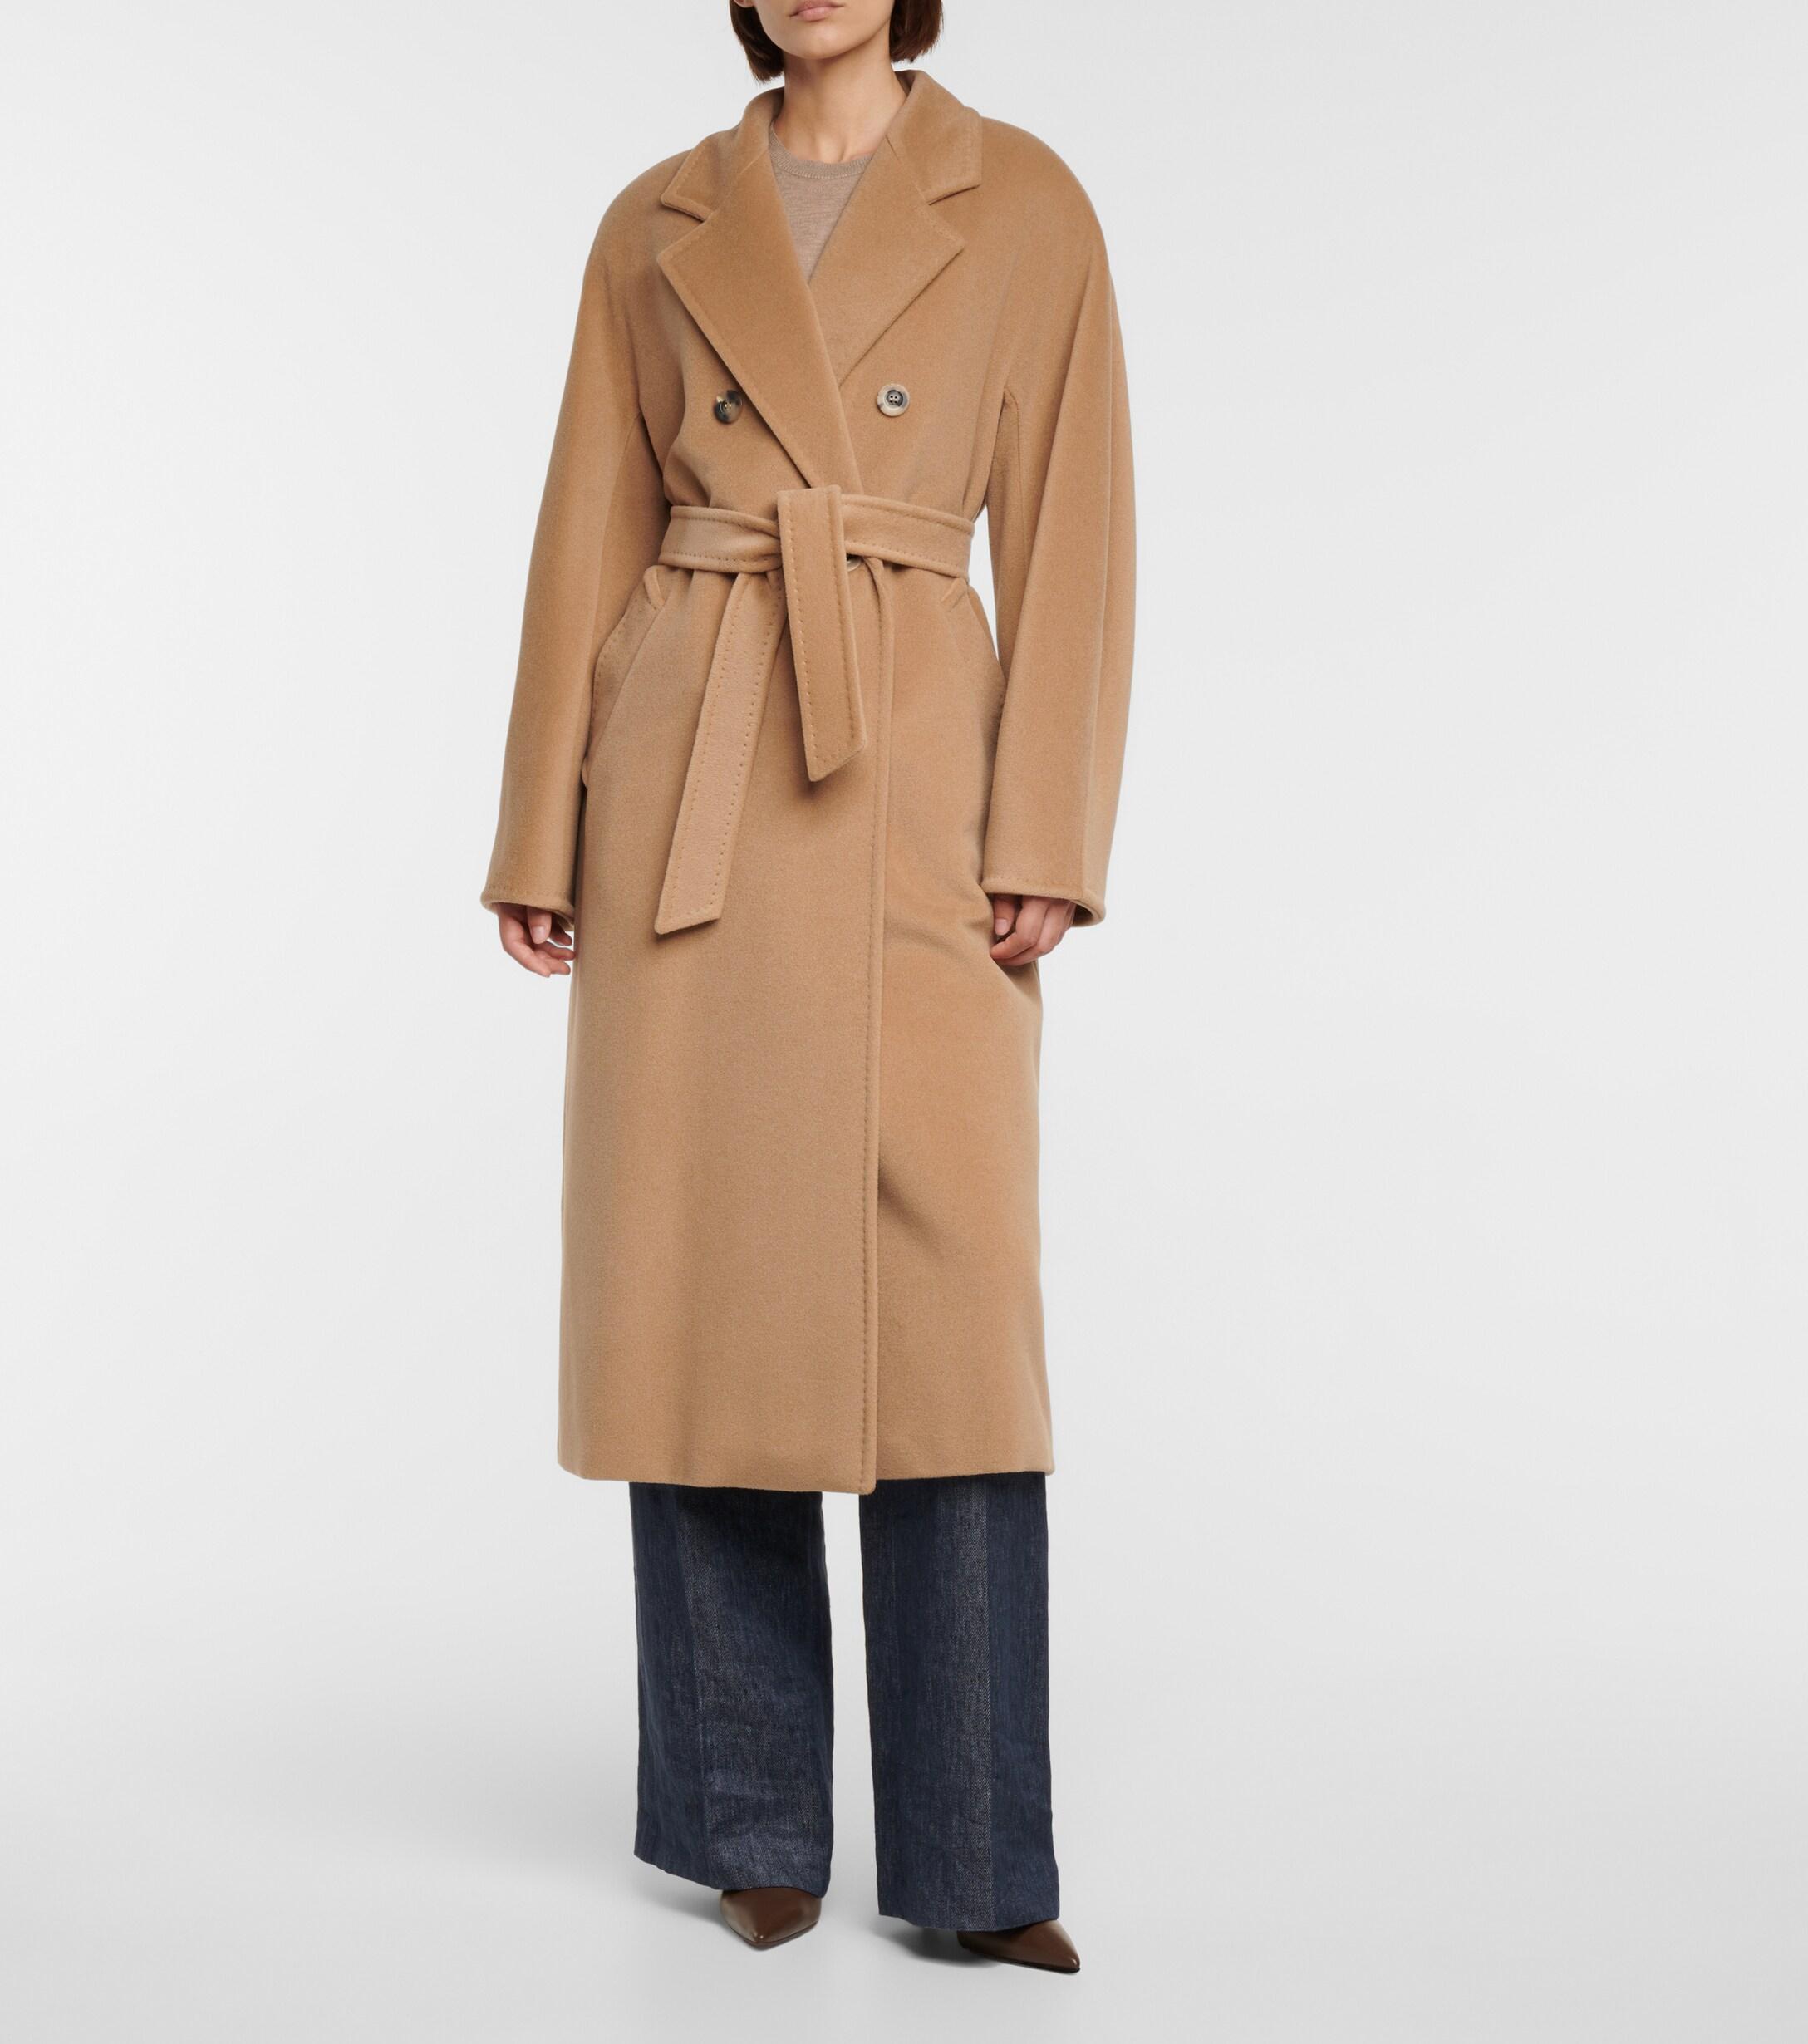 Max Mara Madame Wool And Cashmere Coat in Natural | Lyst Canada